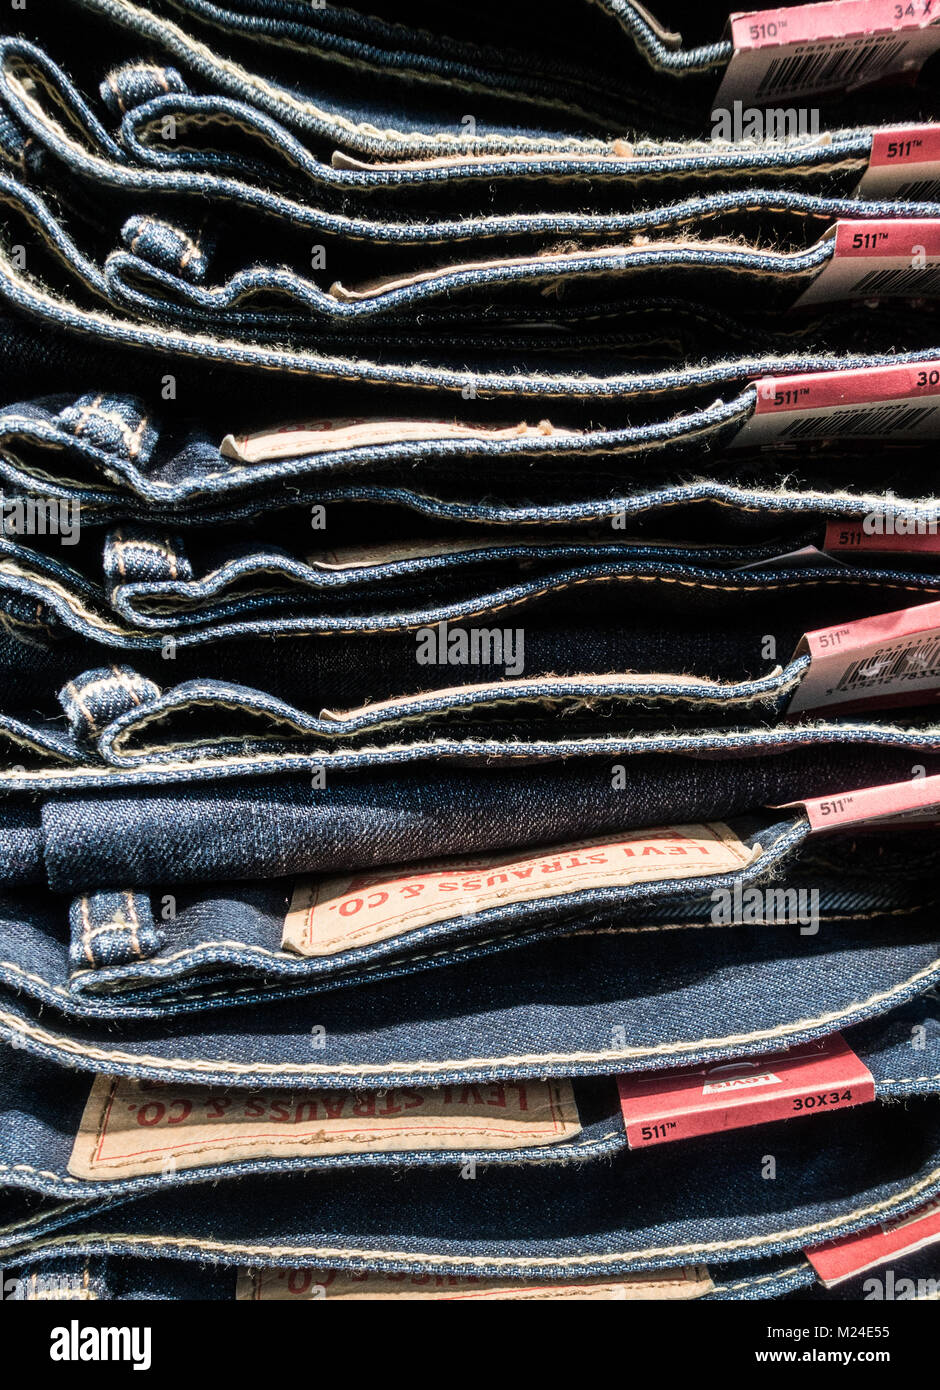 Levi jeans display in Levi store. Stock Photo